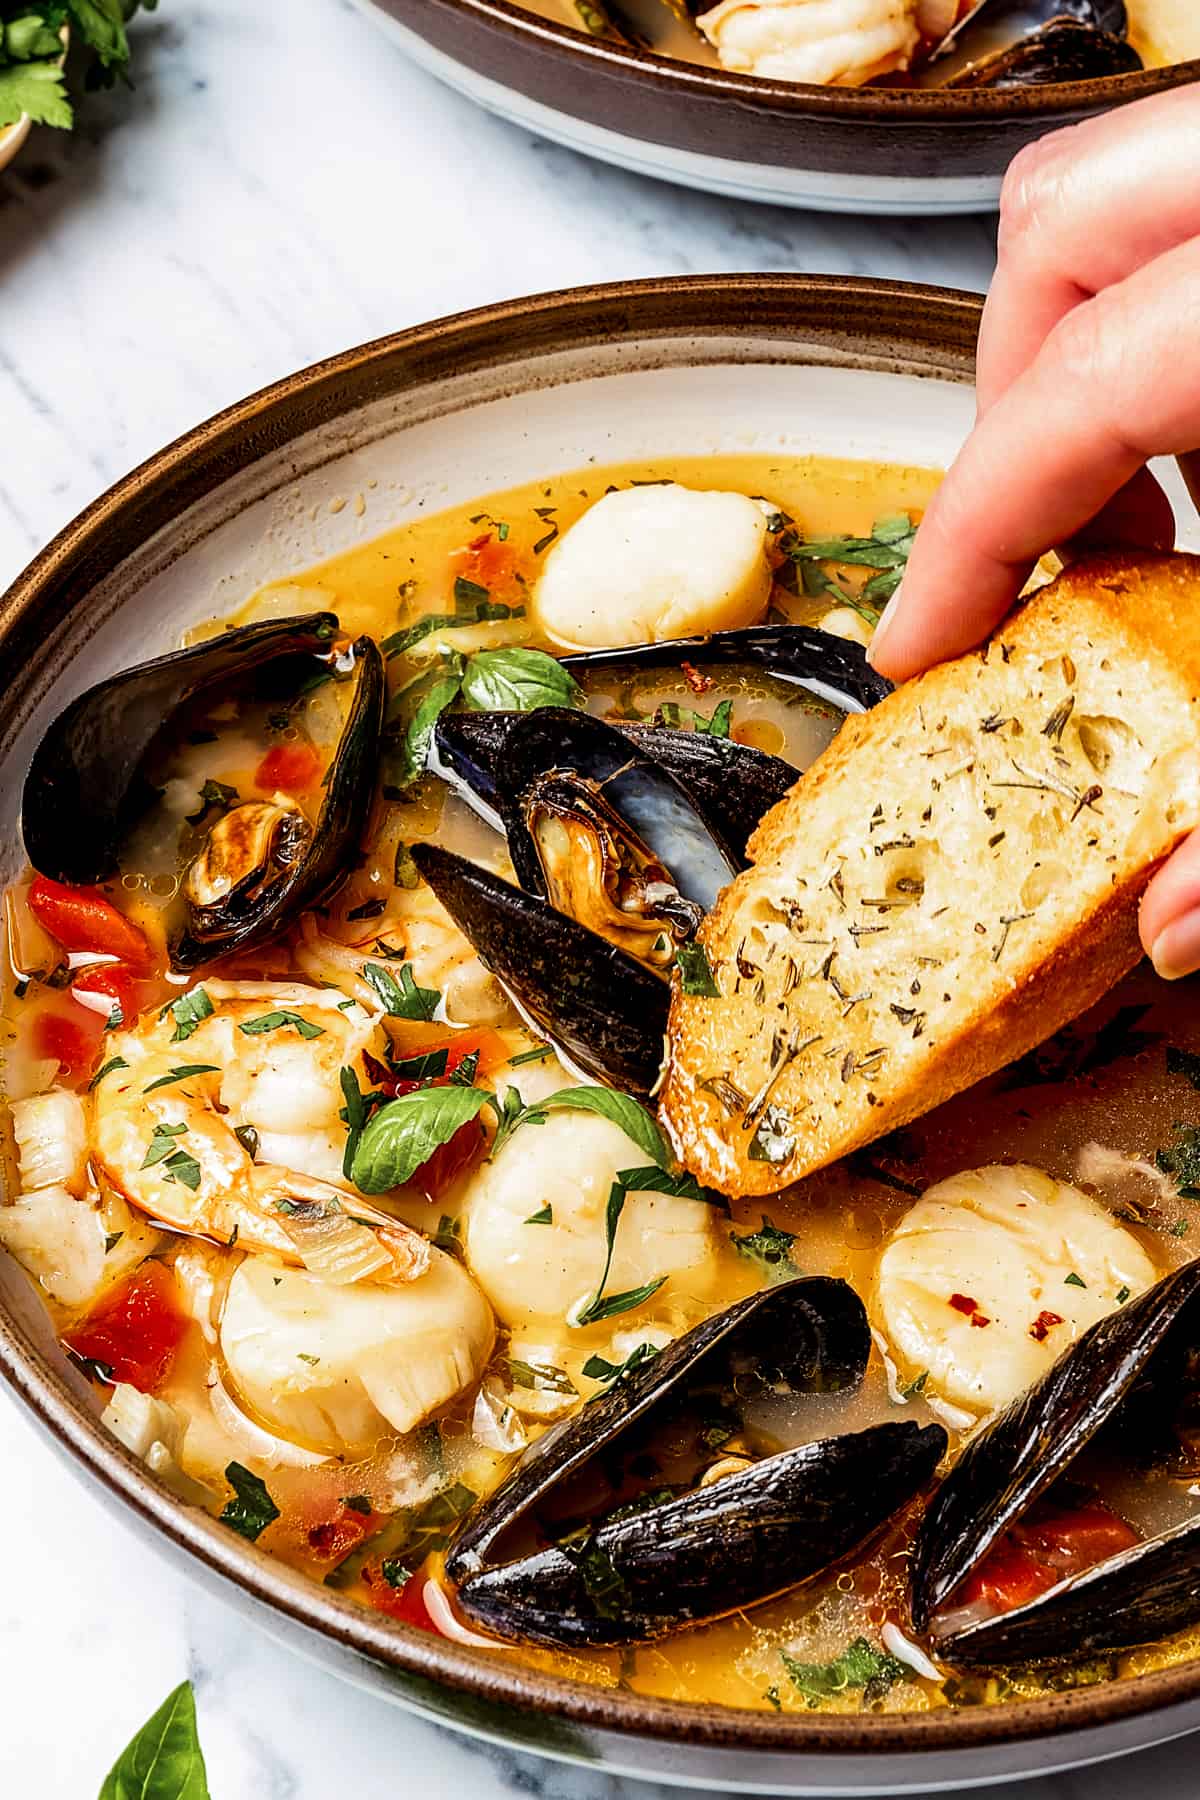 Dipping a baguette slice into bouillabaisse.